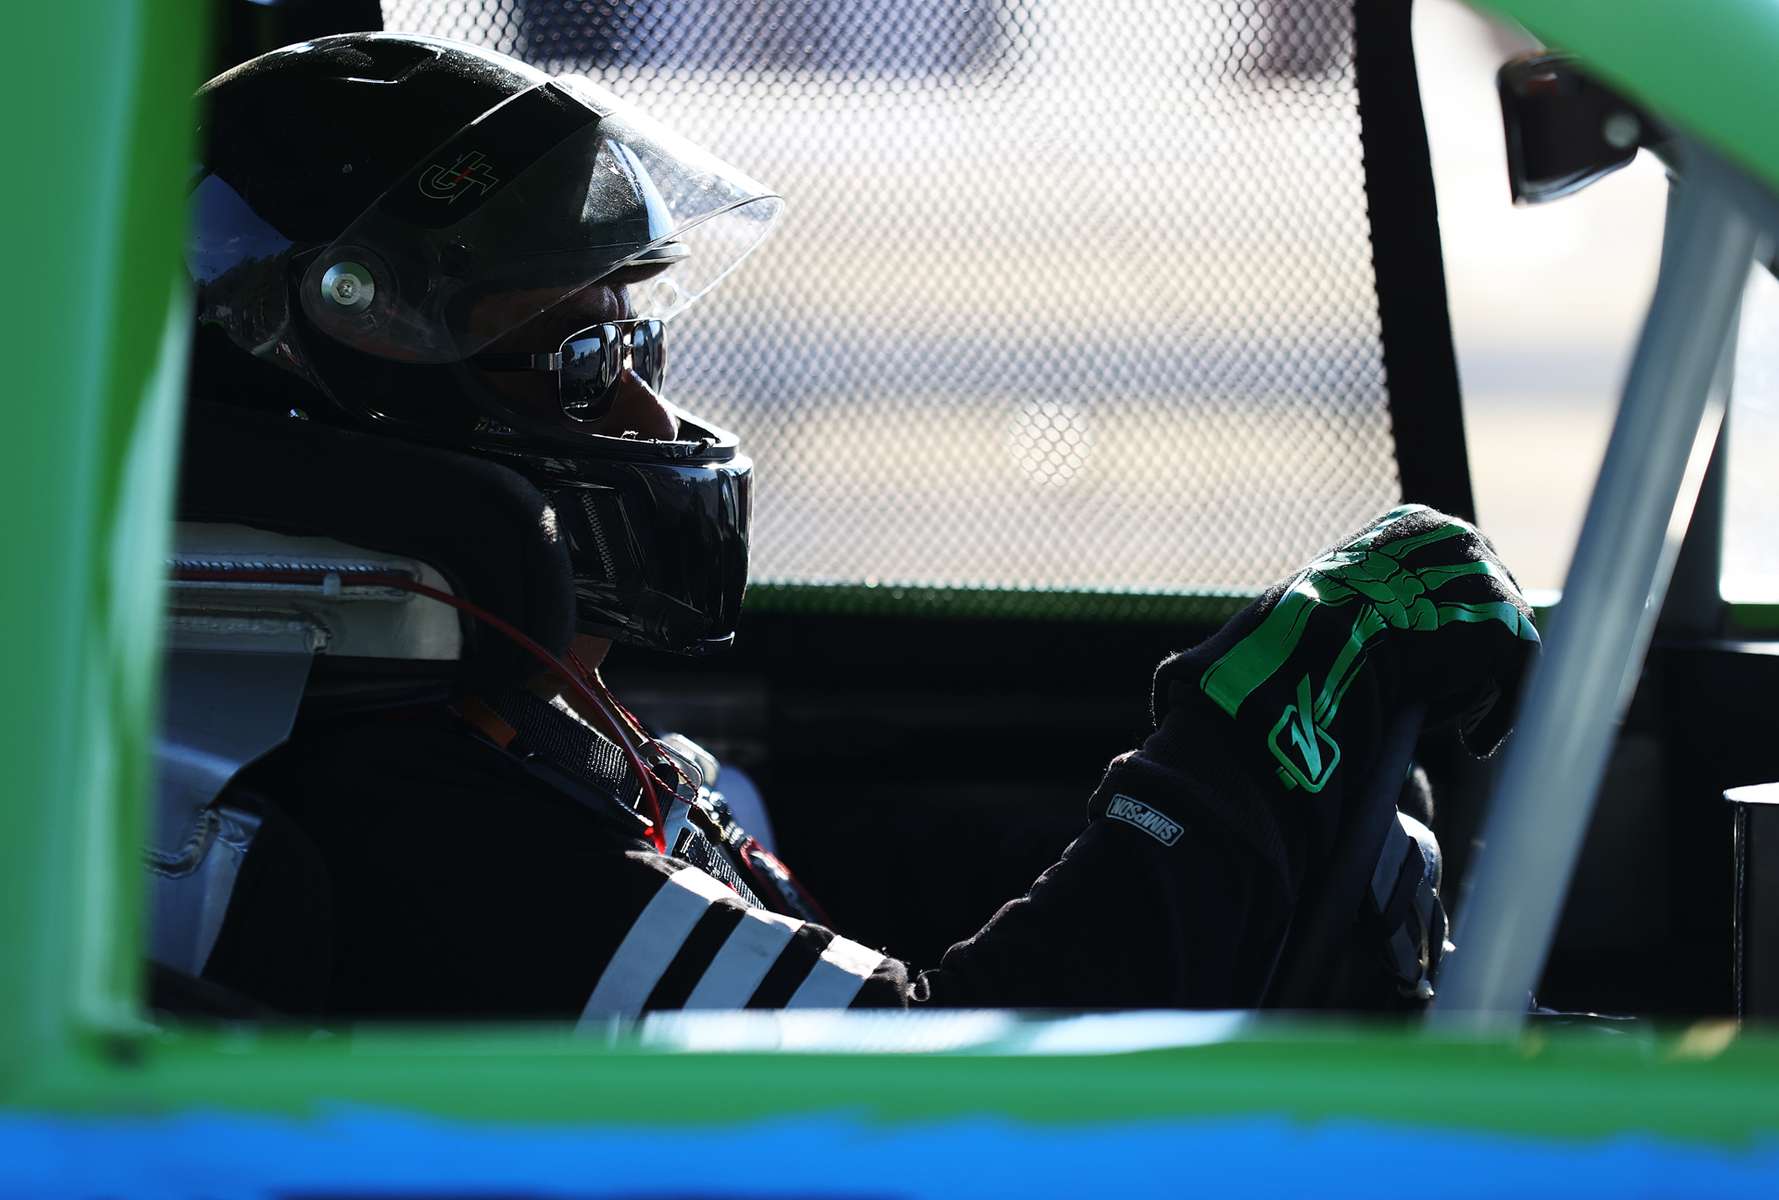 A driver looks on before a race during NASCAR Advance Auto Series Opening Night  at Riverhead Raceway on August 01, 2020 in Riverhead, New York.  The race track had been closed due to the coronavirus COVID-19 pandemic.  More than 4,585,258 people in the United States alone have been infected with the coronavirus and at least 154,000 have died.  